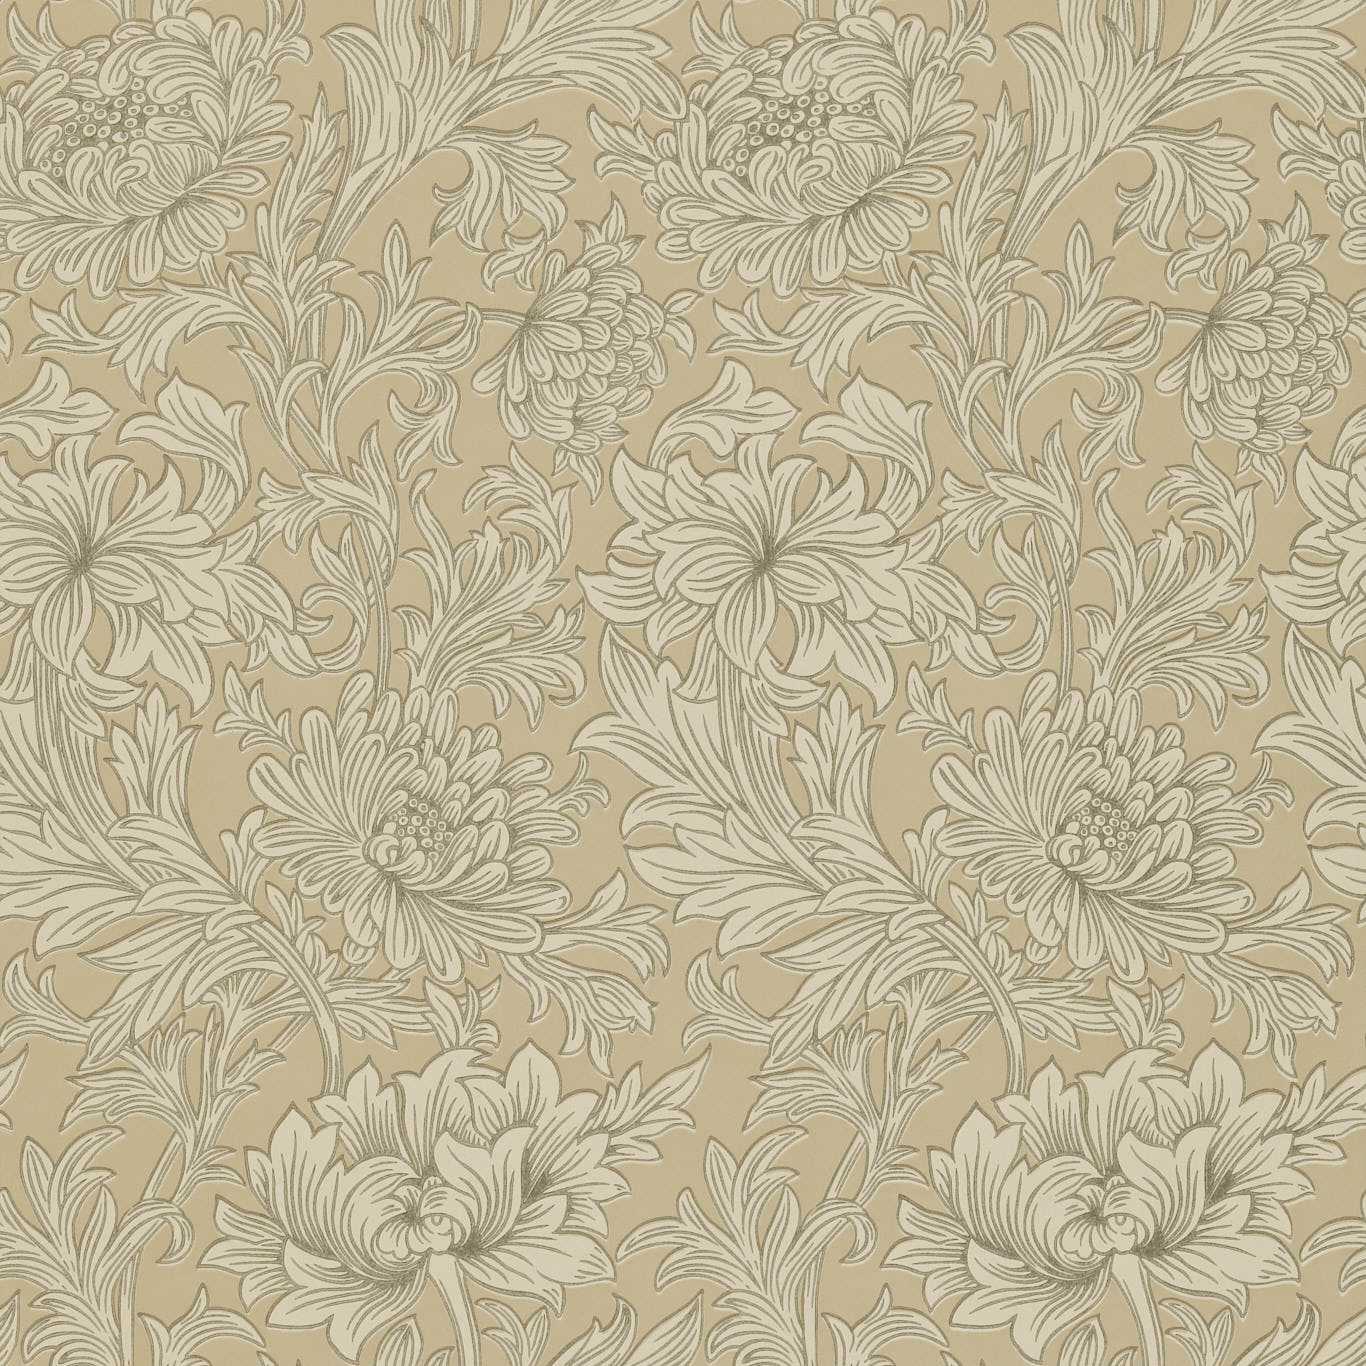 Chrysanthemum Toile Ivory/Gold Wallpaper DMCW210417 by Morris & Co